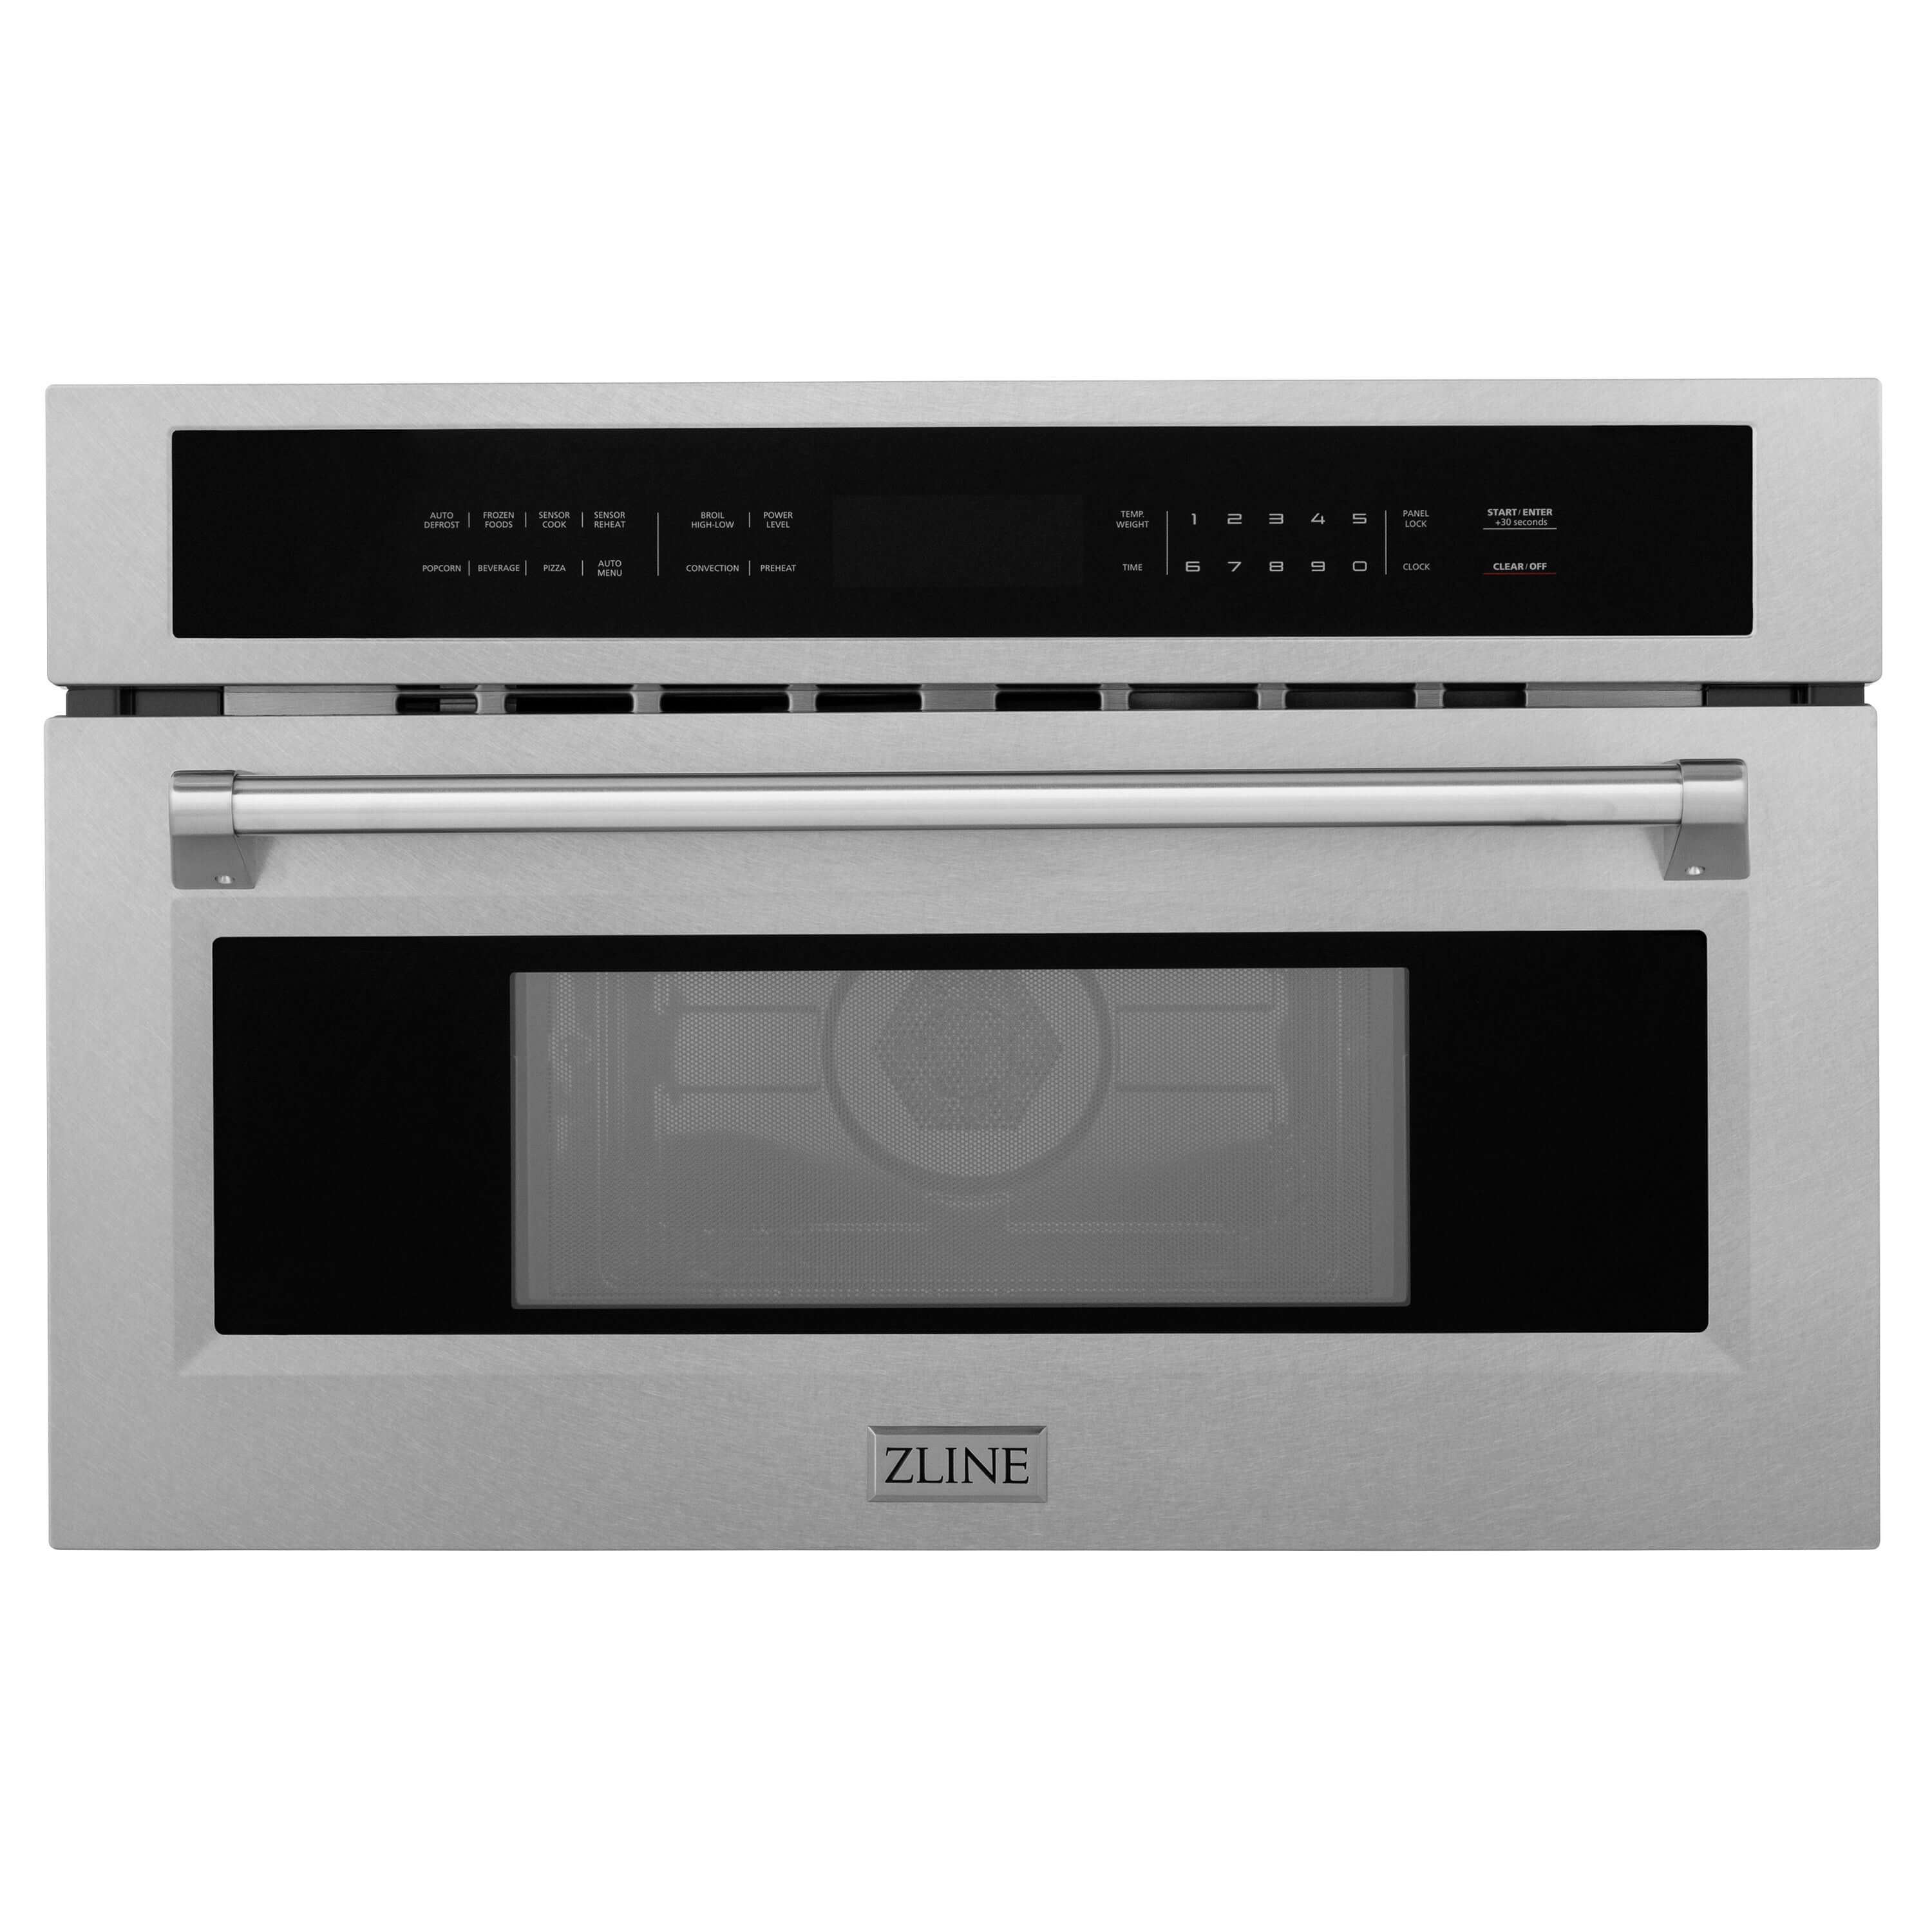 ZLINE 30 in. 1.6 cu ft. Built-in Convection Microwave Oven in Fingerprint Resistant Stainless Steel (MWO-30-SS)